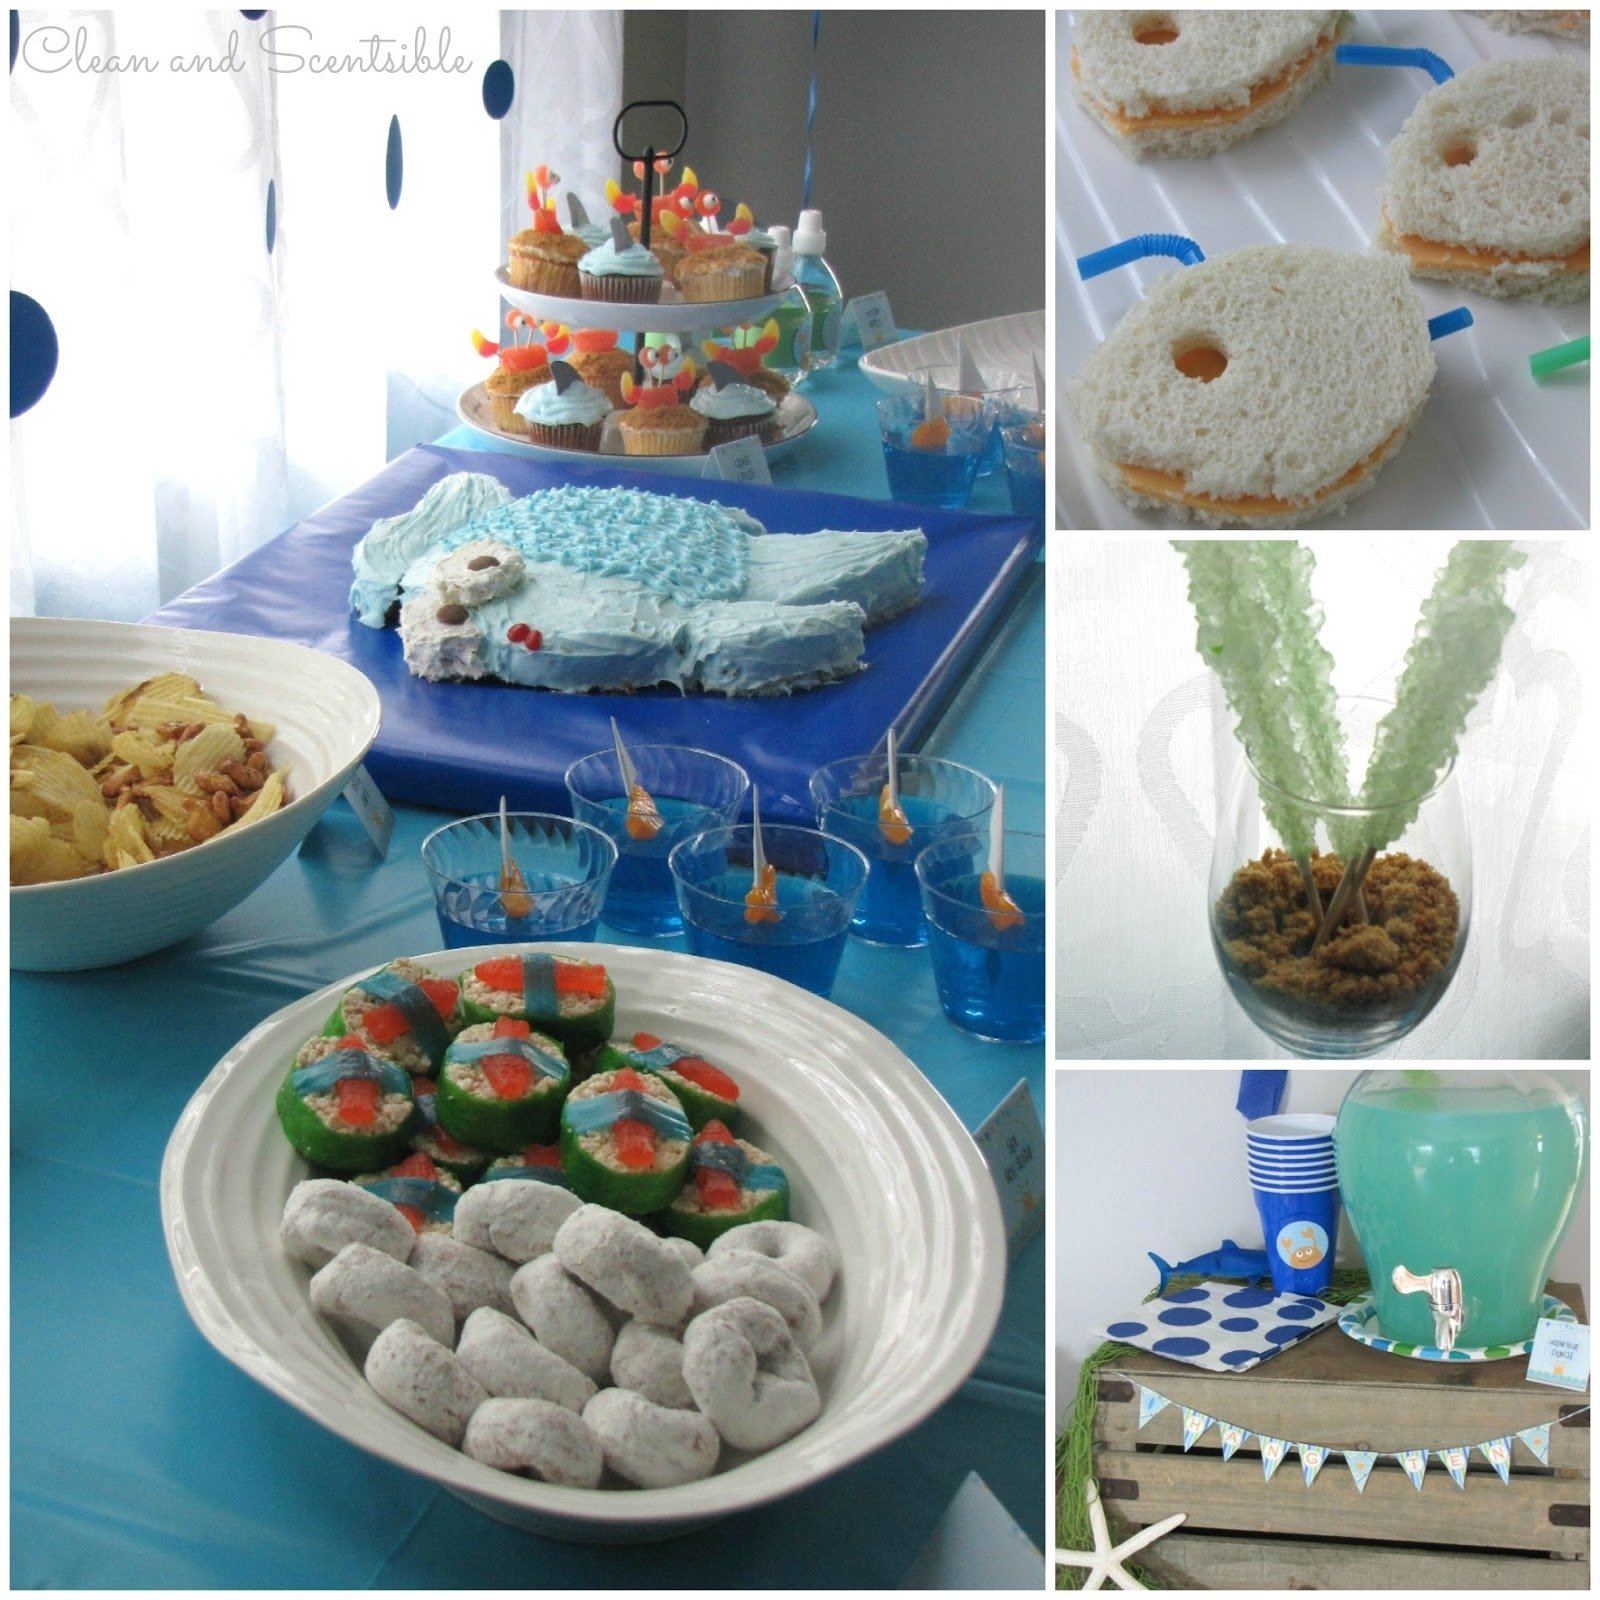 10 Cute Under The Sea Party Food Ideas under the sea party clean and scentsible 1 2022